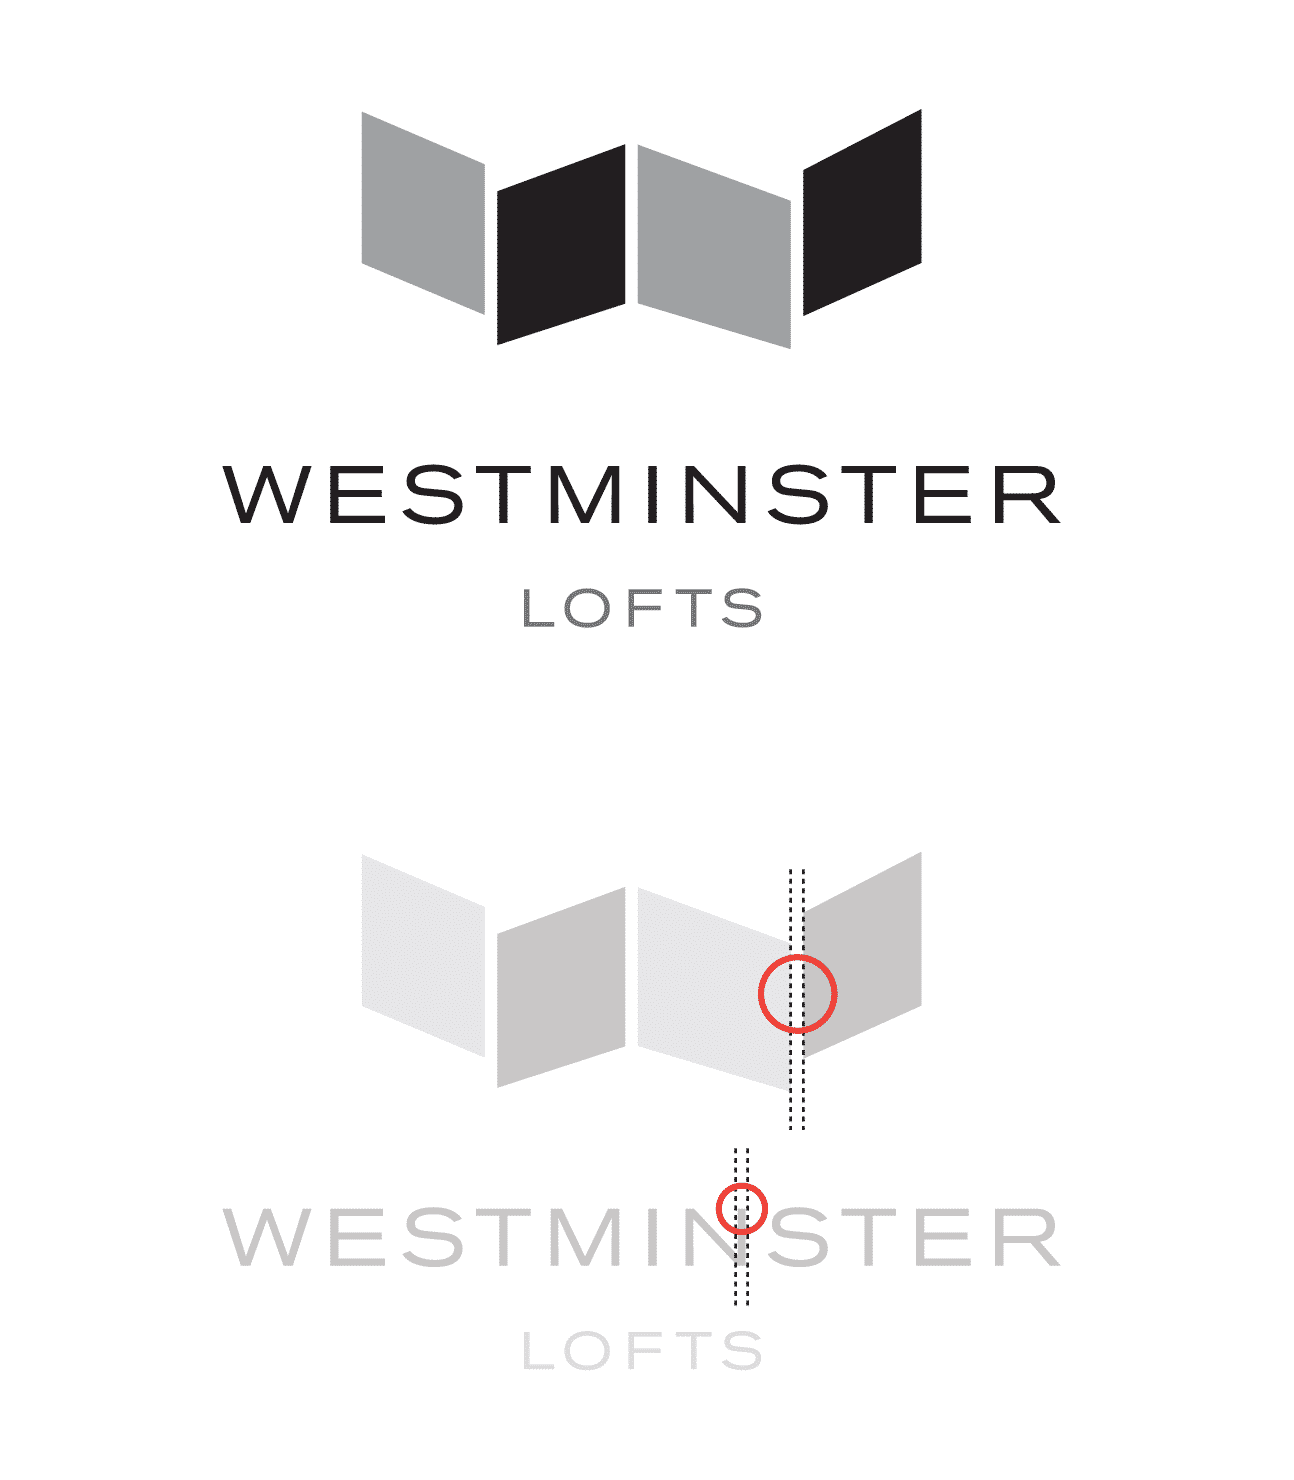 Matching the font to the negative space in the logo icon of Westminster Lofts